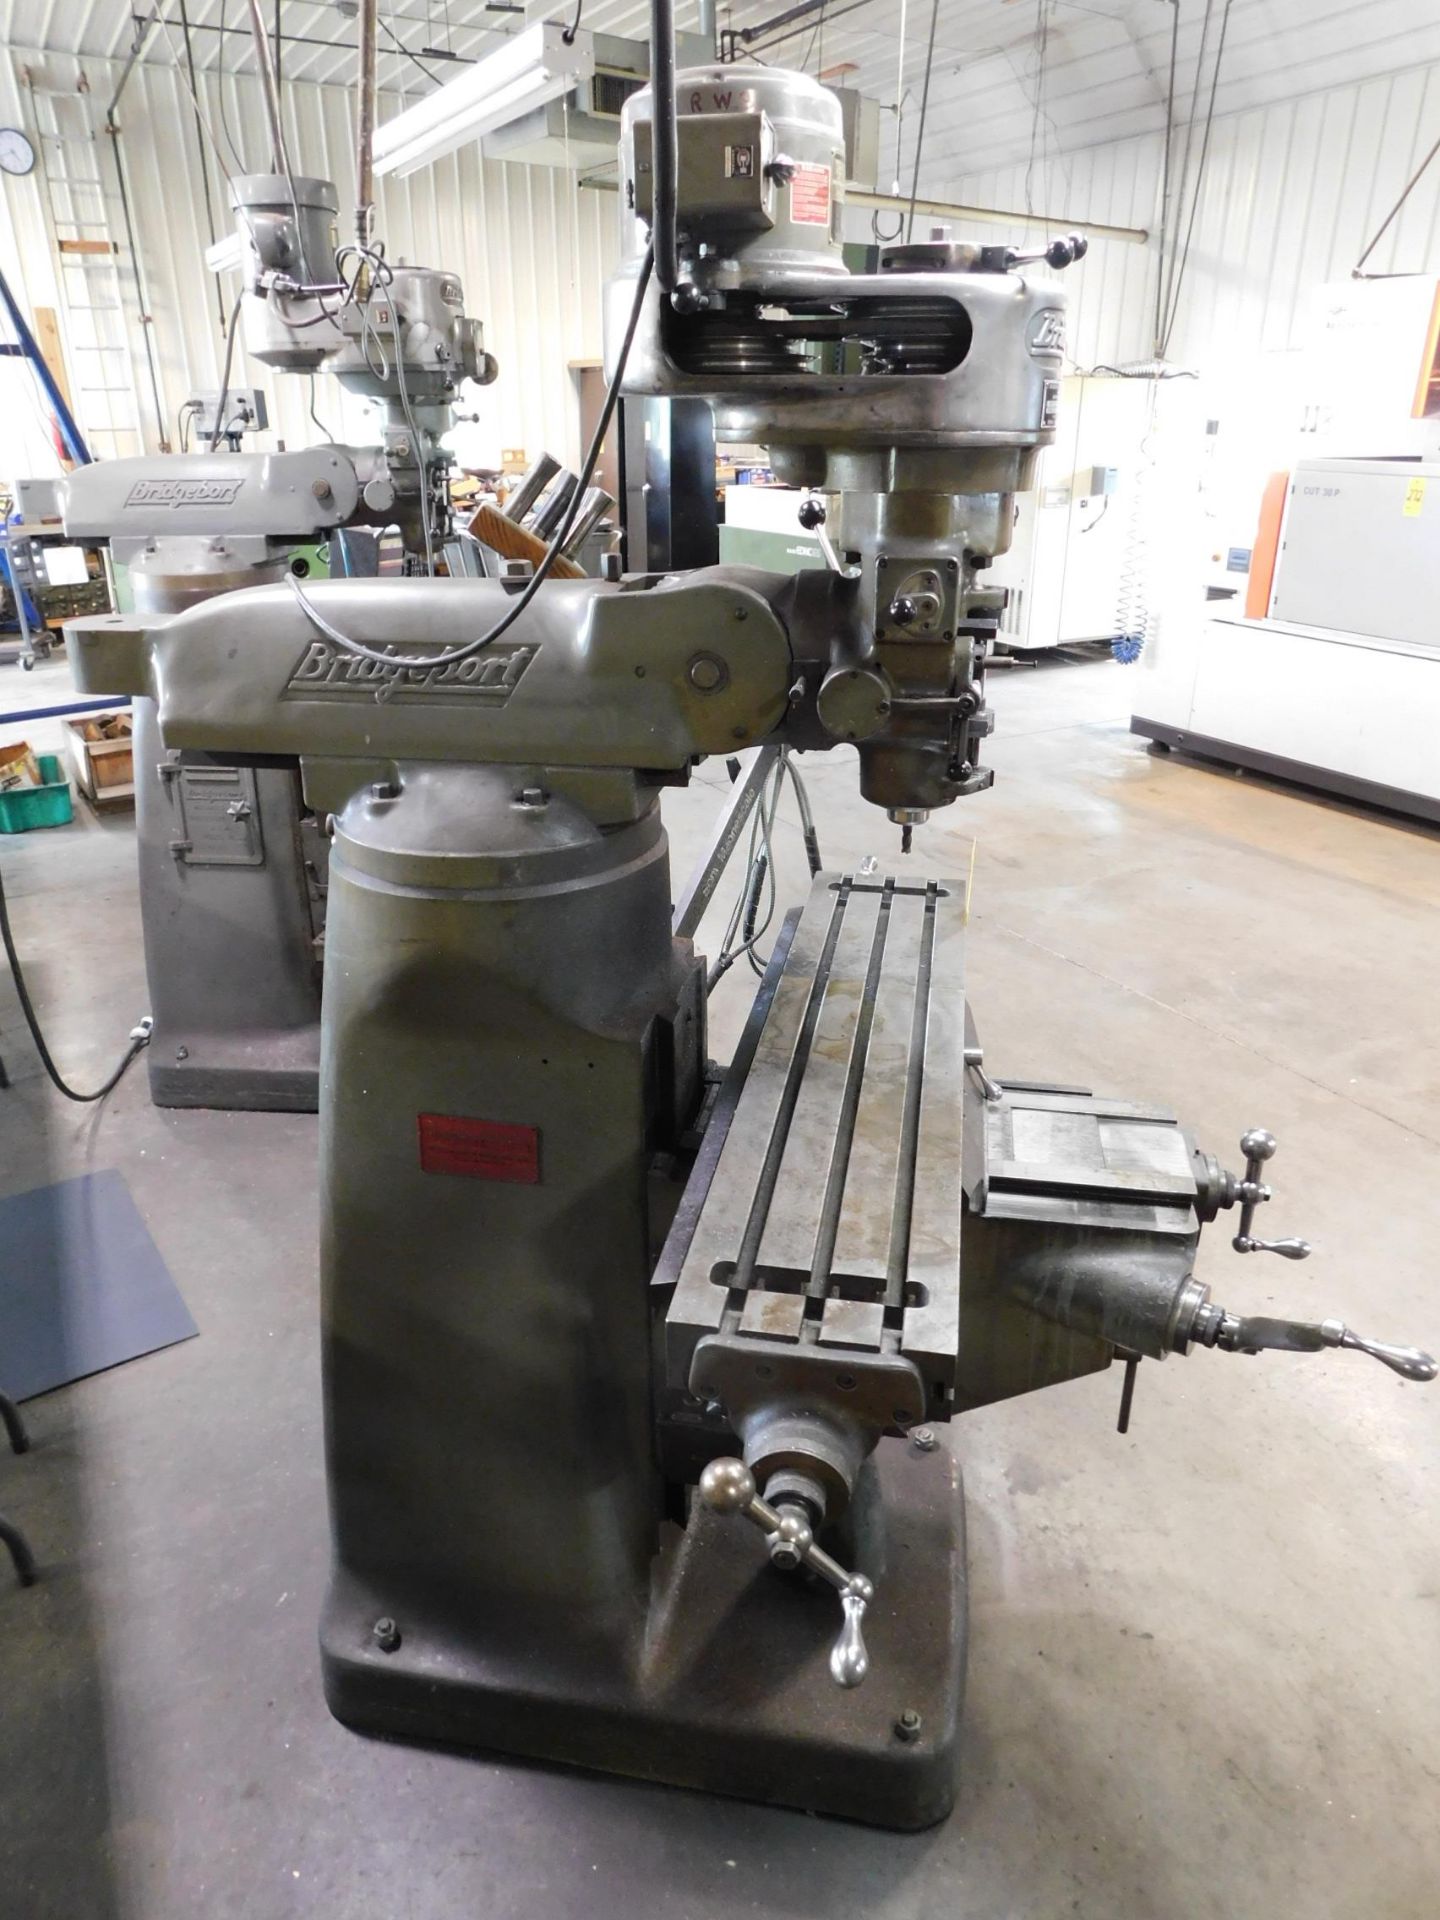 Bridgeport 1H.P. Step Pulley Vertical Mill sn#12BR139963, 9"X42" Table, R-8 Collets, Sony 2-Axis - Image 8 of 12